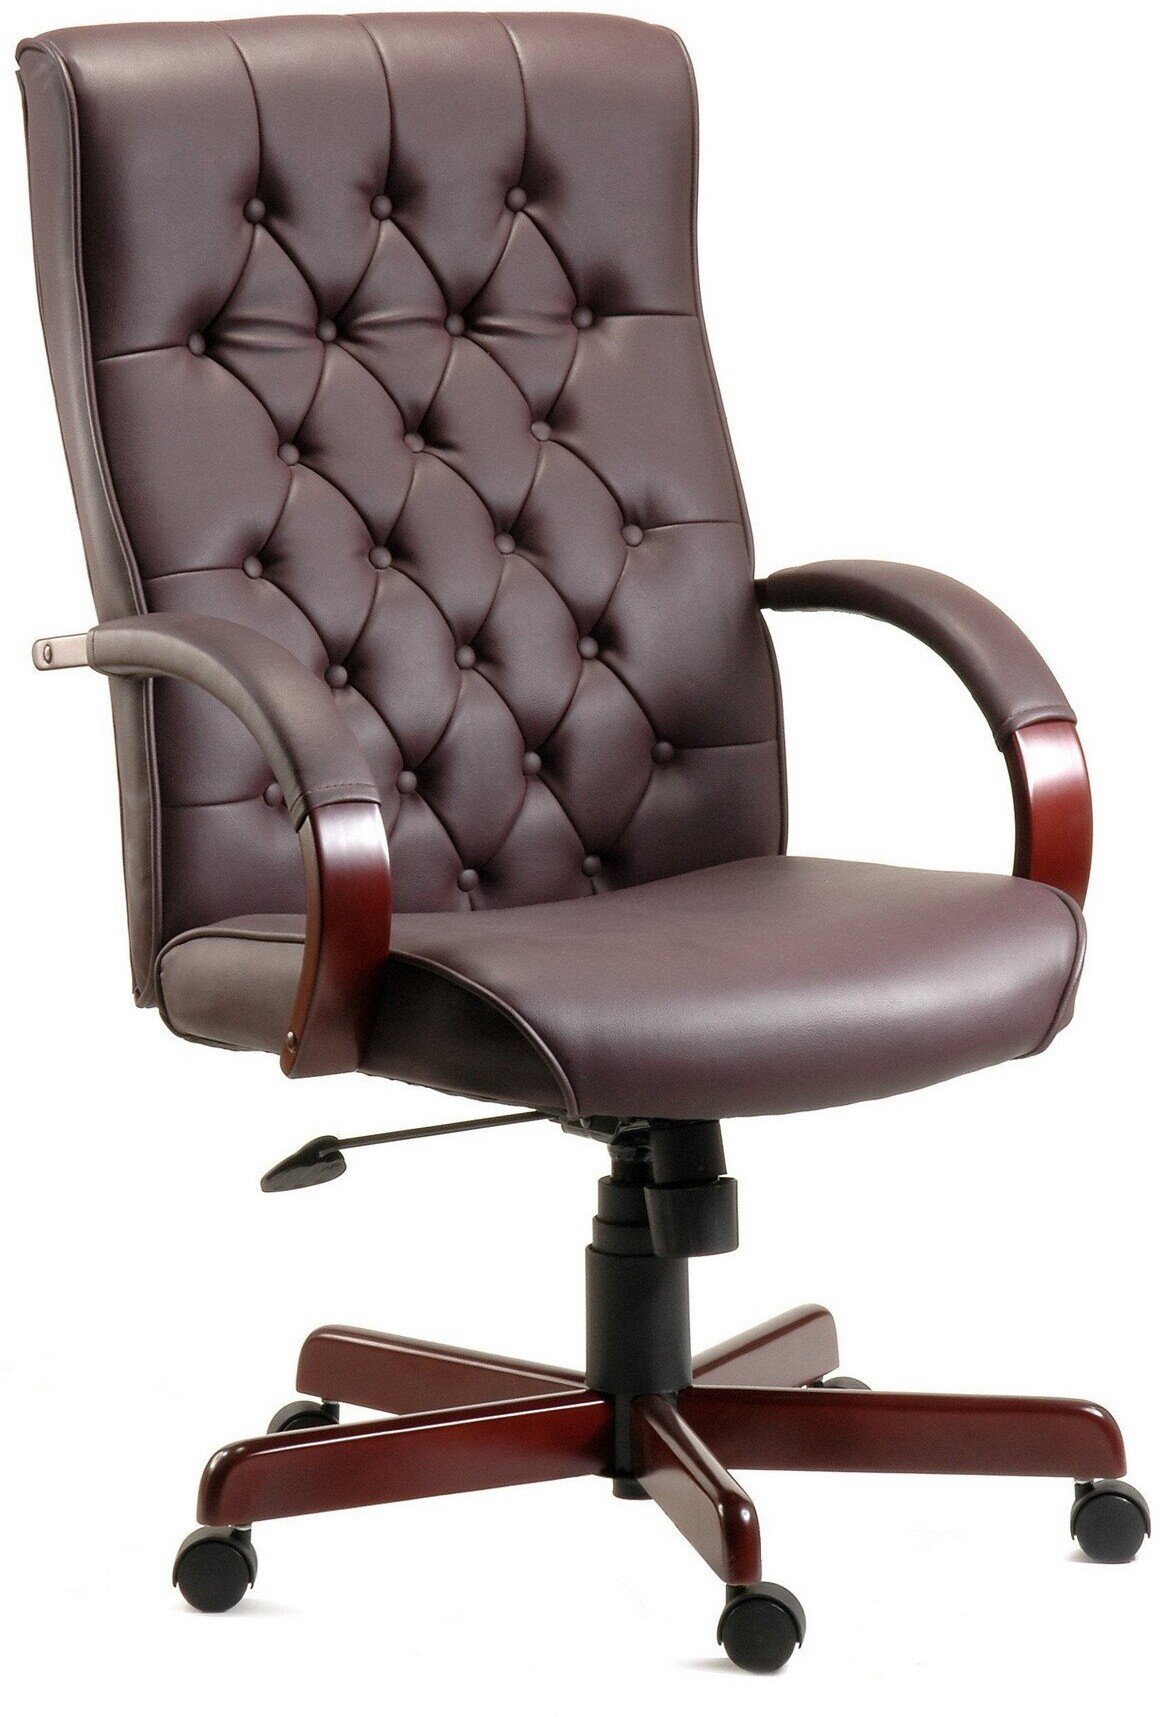 Corporate Office Chairs